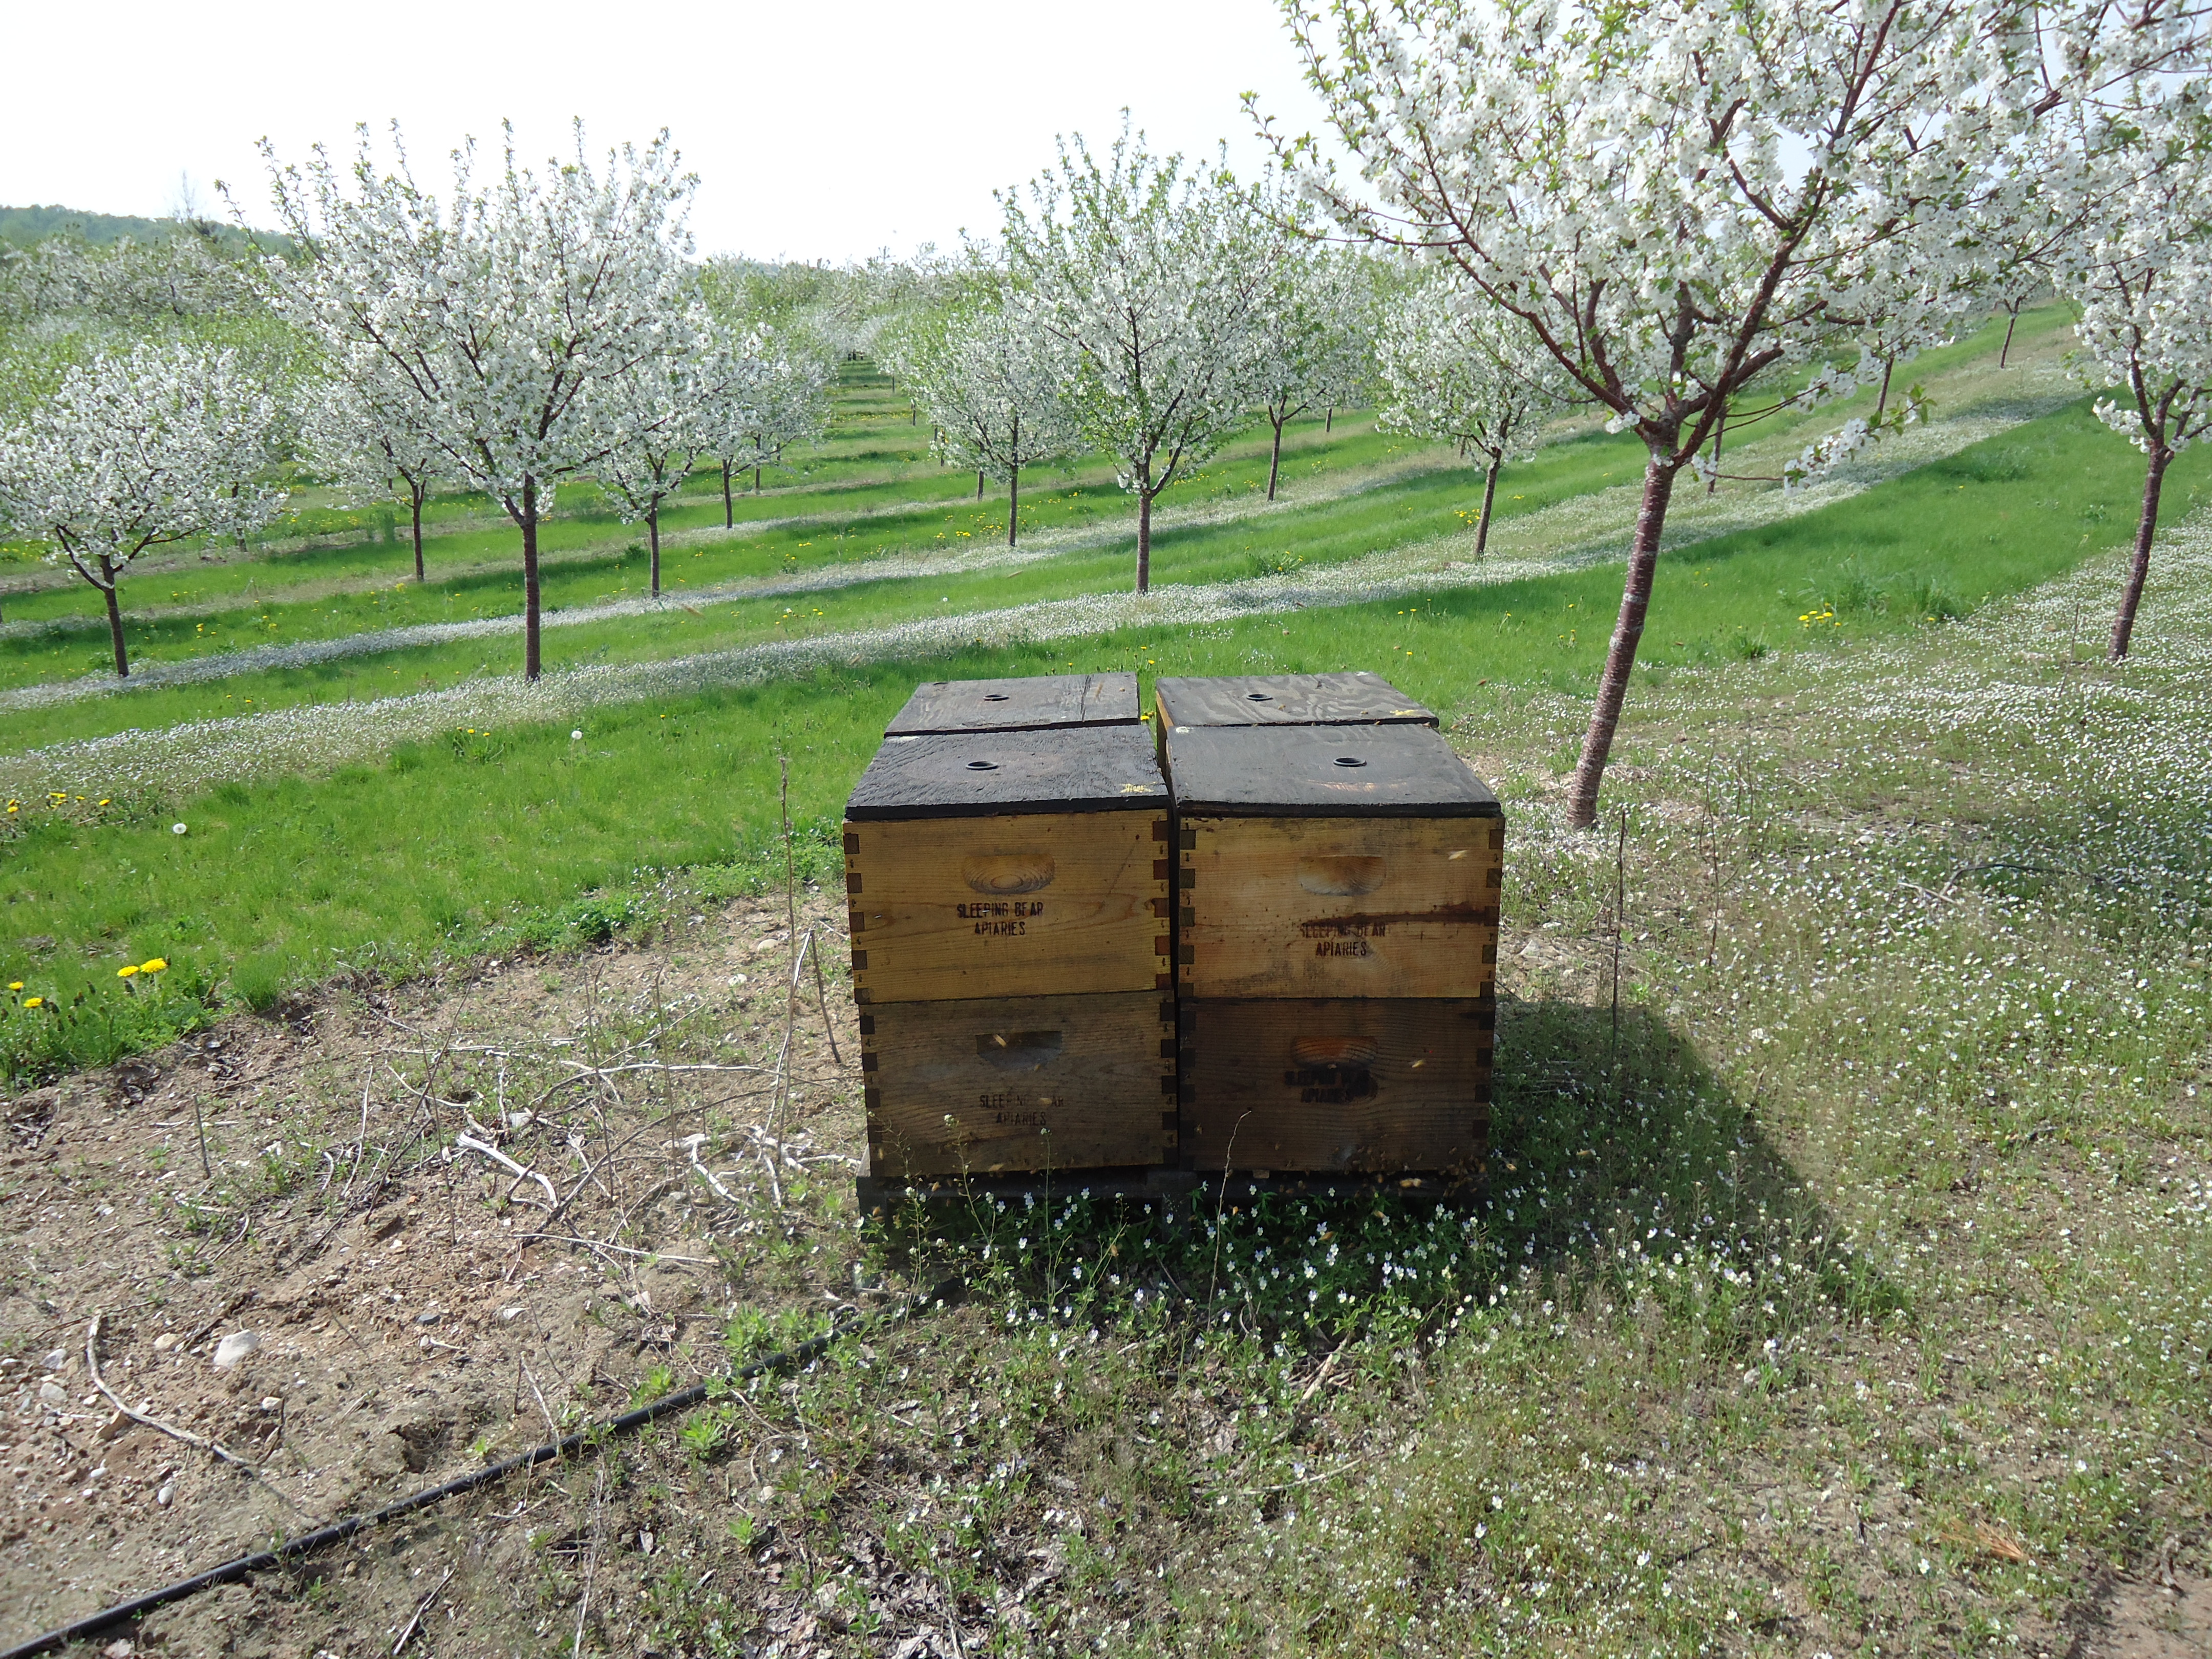 The Fruit growers have to rent bees to ensure pollination. These bees are from Sleeping Bear Apiaries 